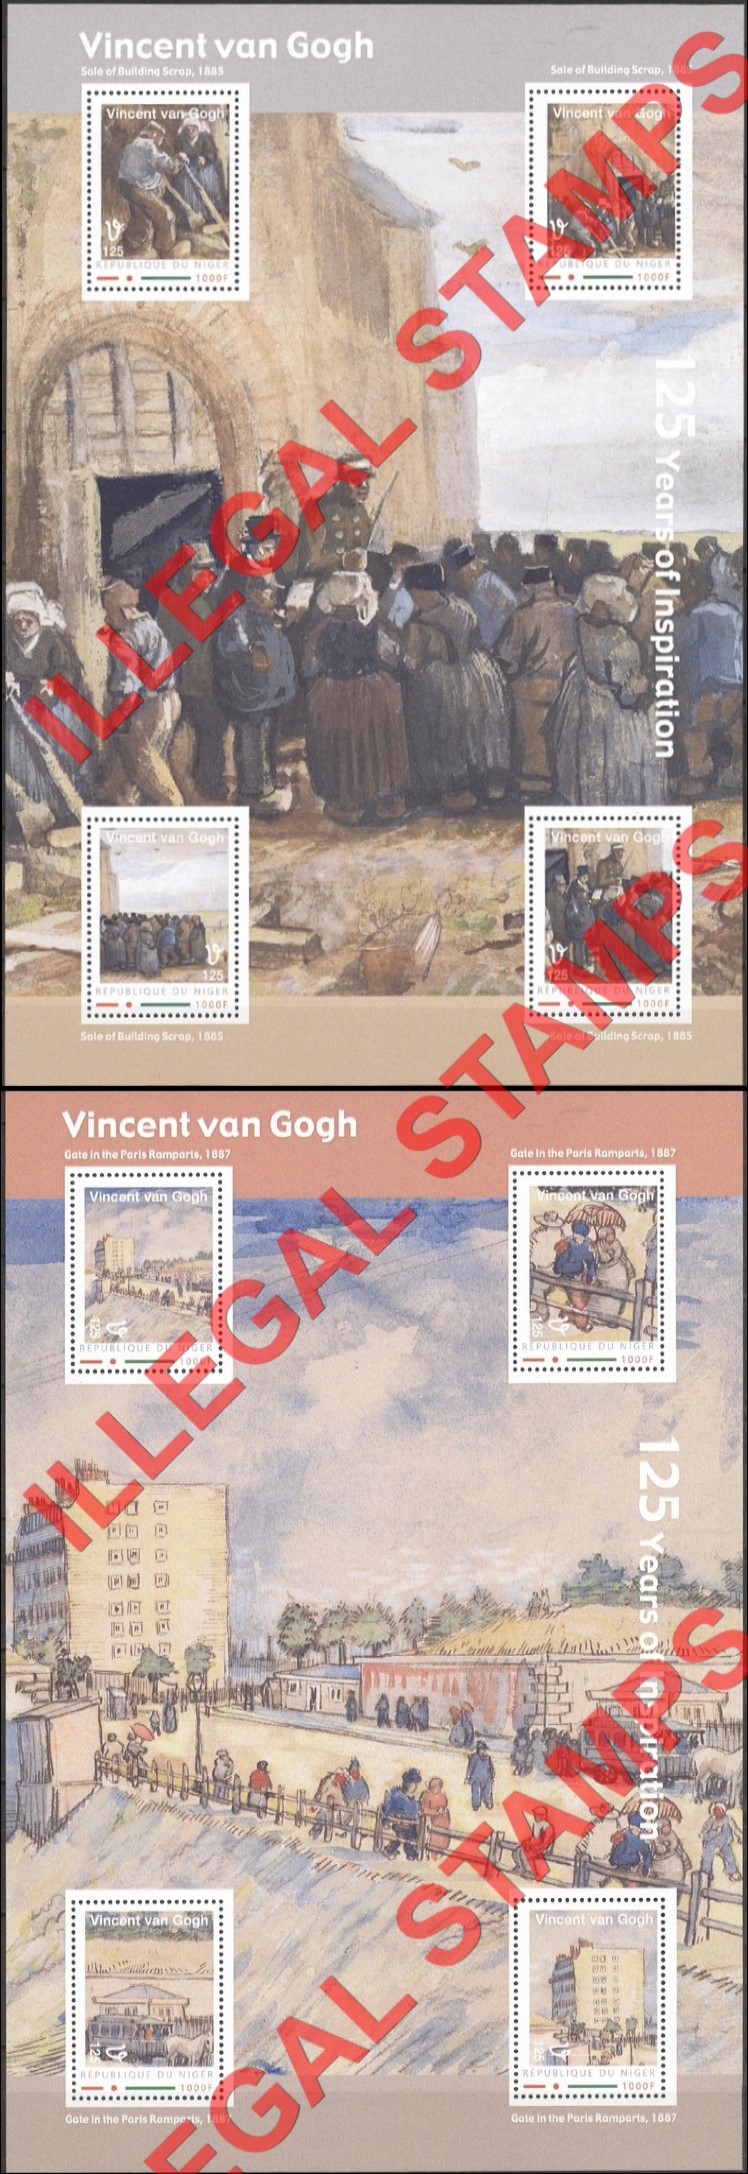 Niger 2012 Paintings by Vincent Van Gogh Illegal Stamp Souvenir Sheets of 4 (Part 4)